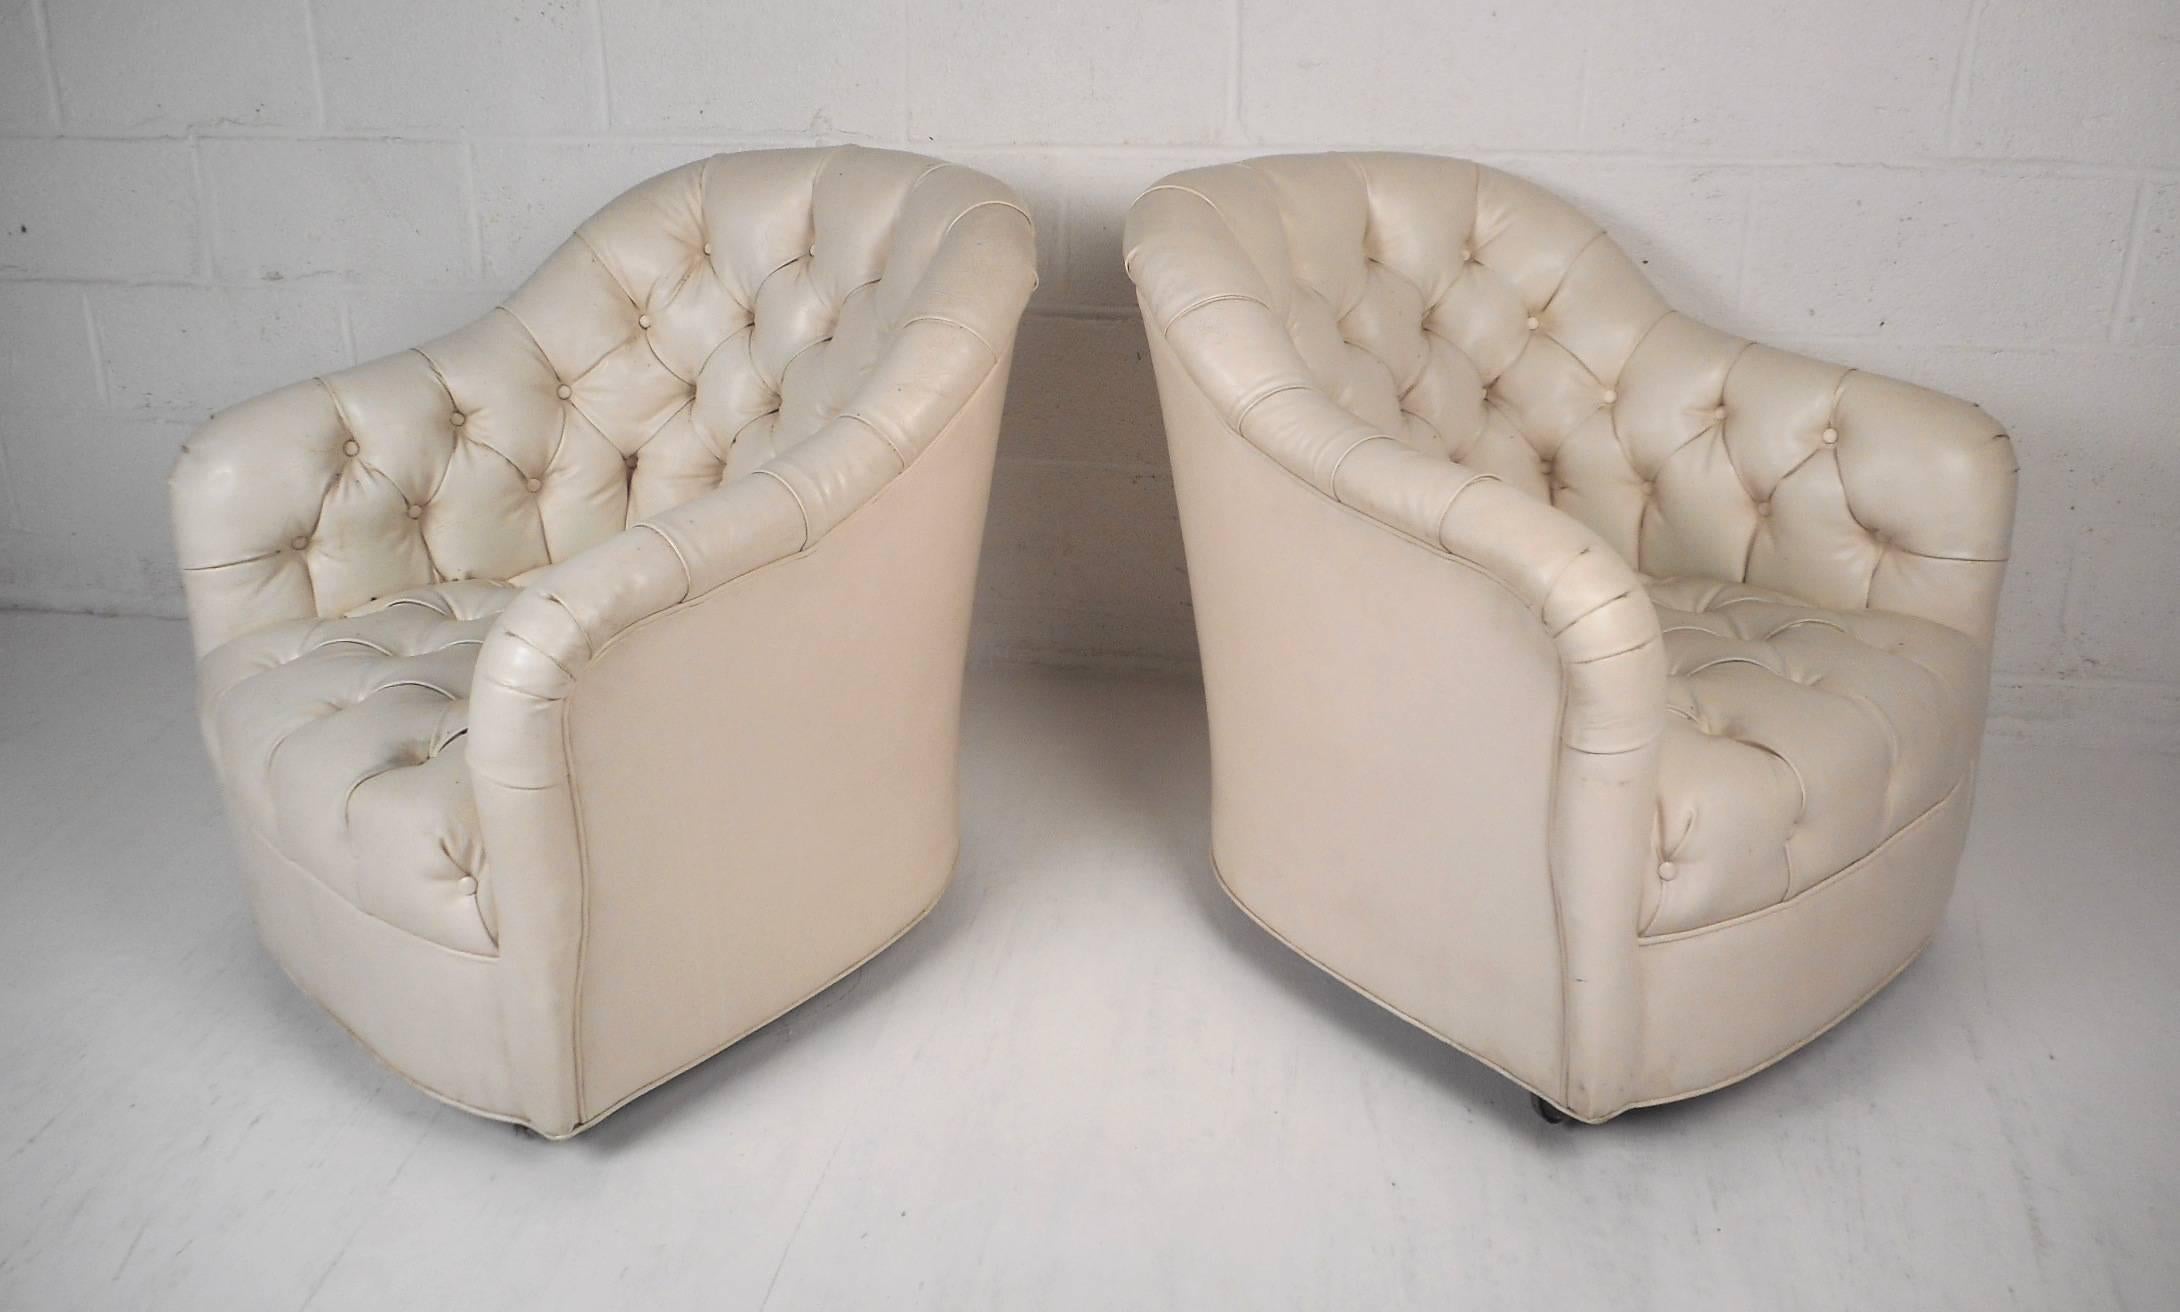 Pair of Mid-Century Modern Tufted Vinyl Lounge Chairs In Good Condition For Sale In Brooklyn, NY